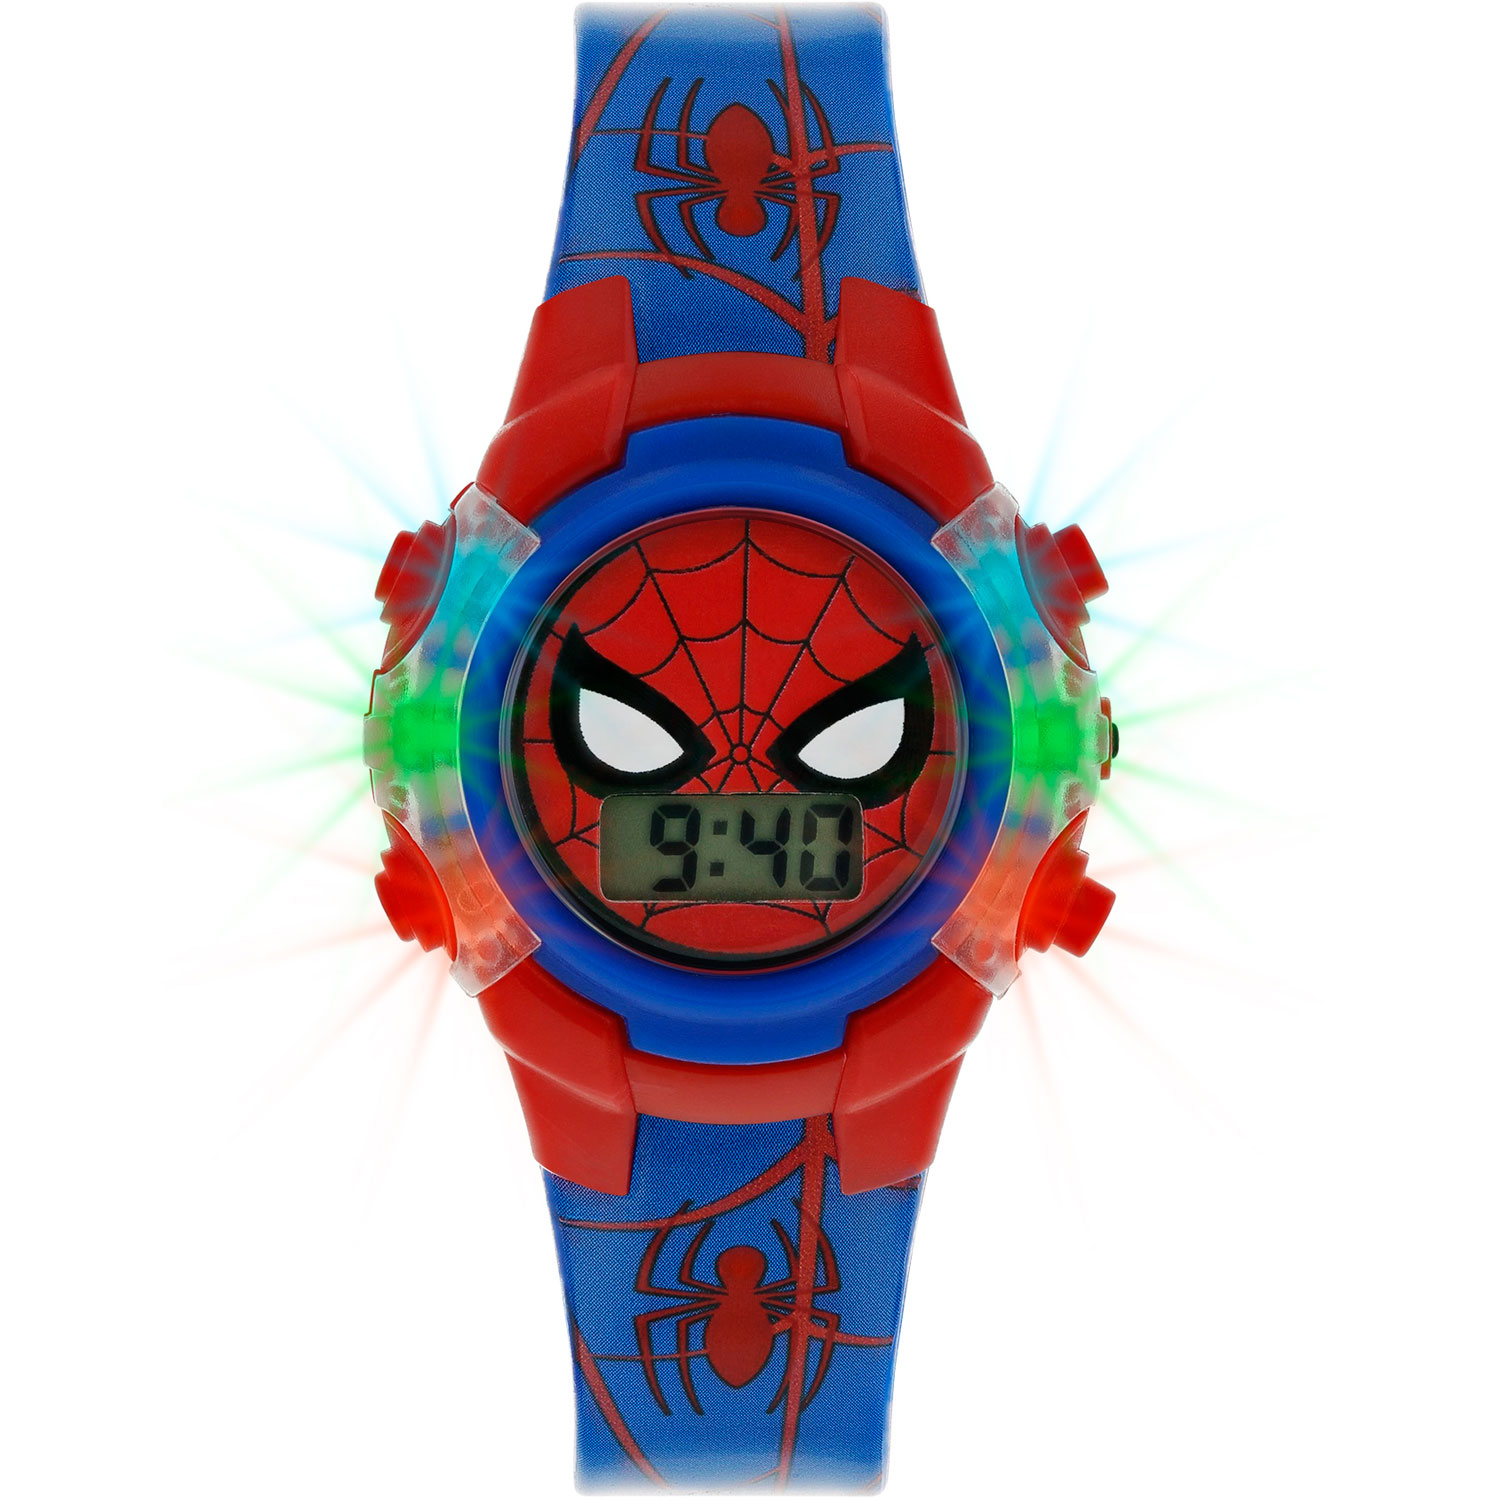 Spiderman Watches with flashing light